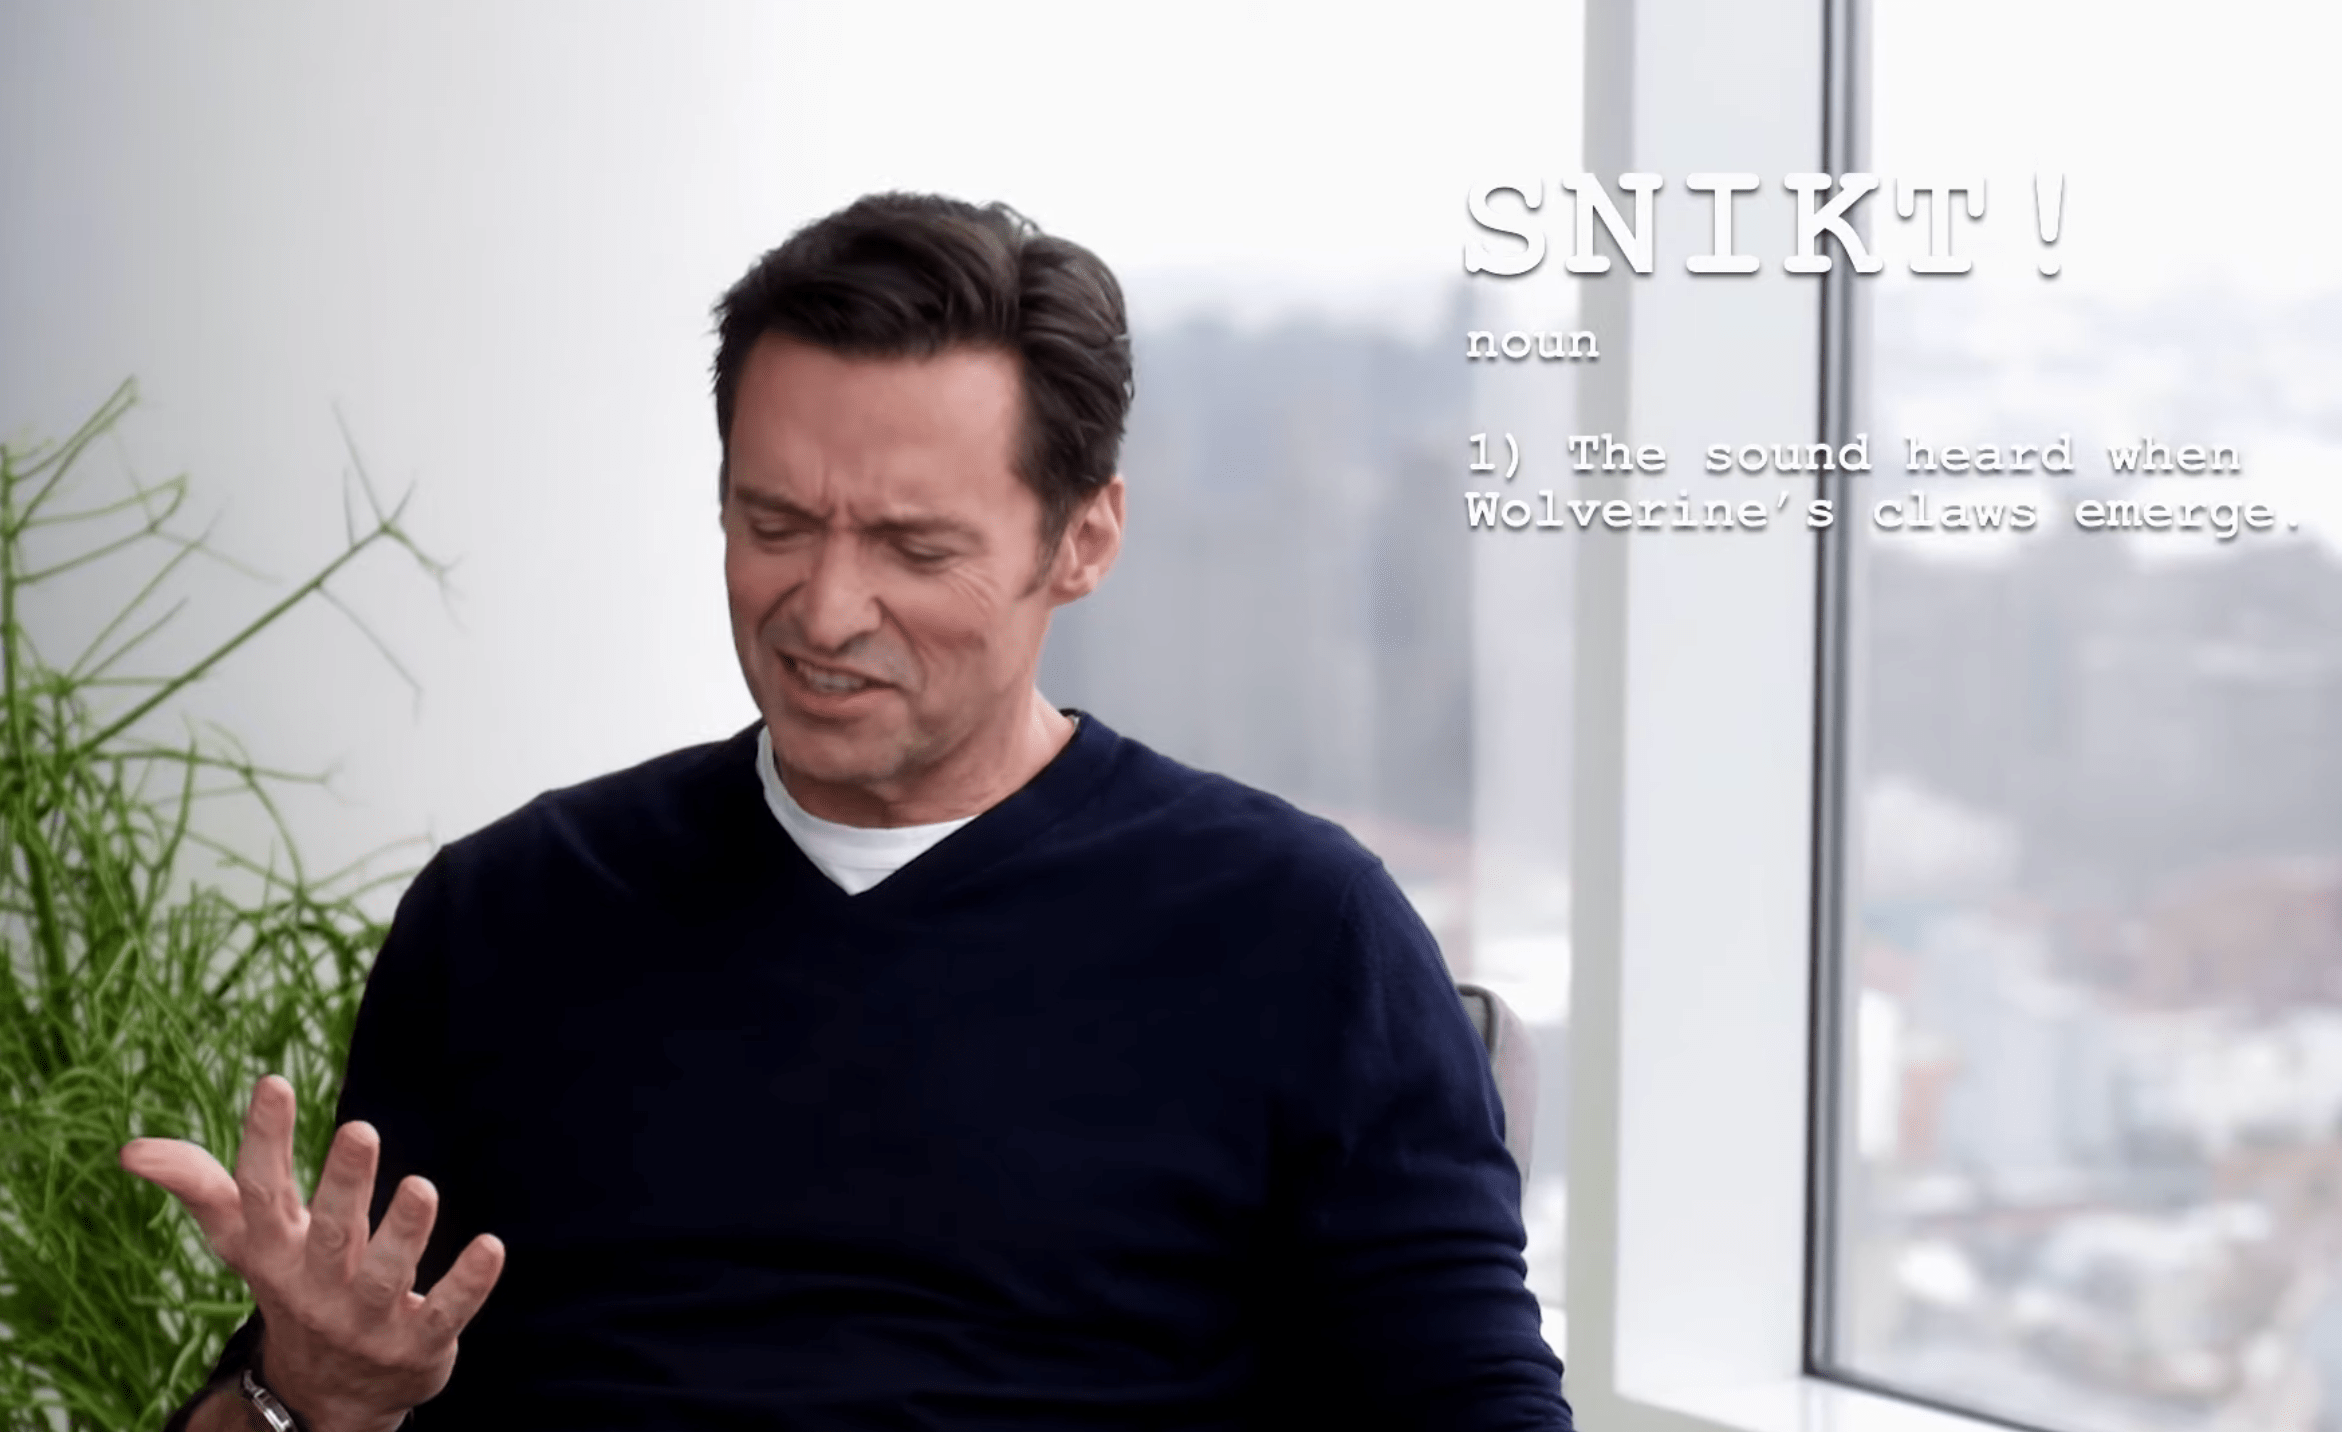 'Marvel's Storyboards' launches today featuring Hugh Jackman